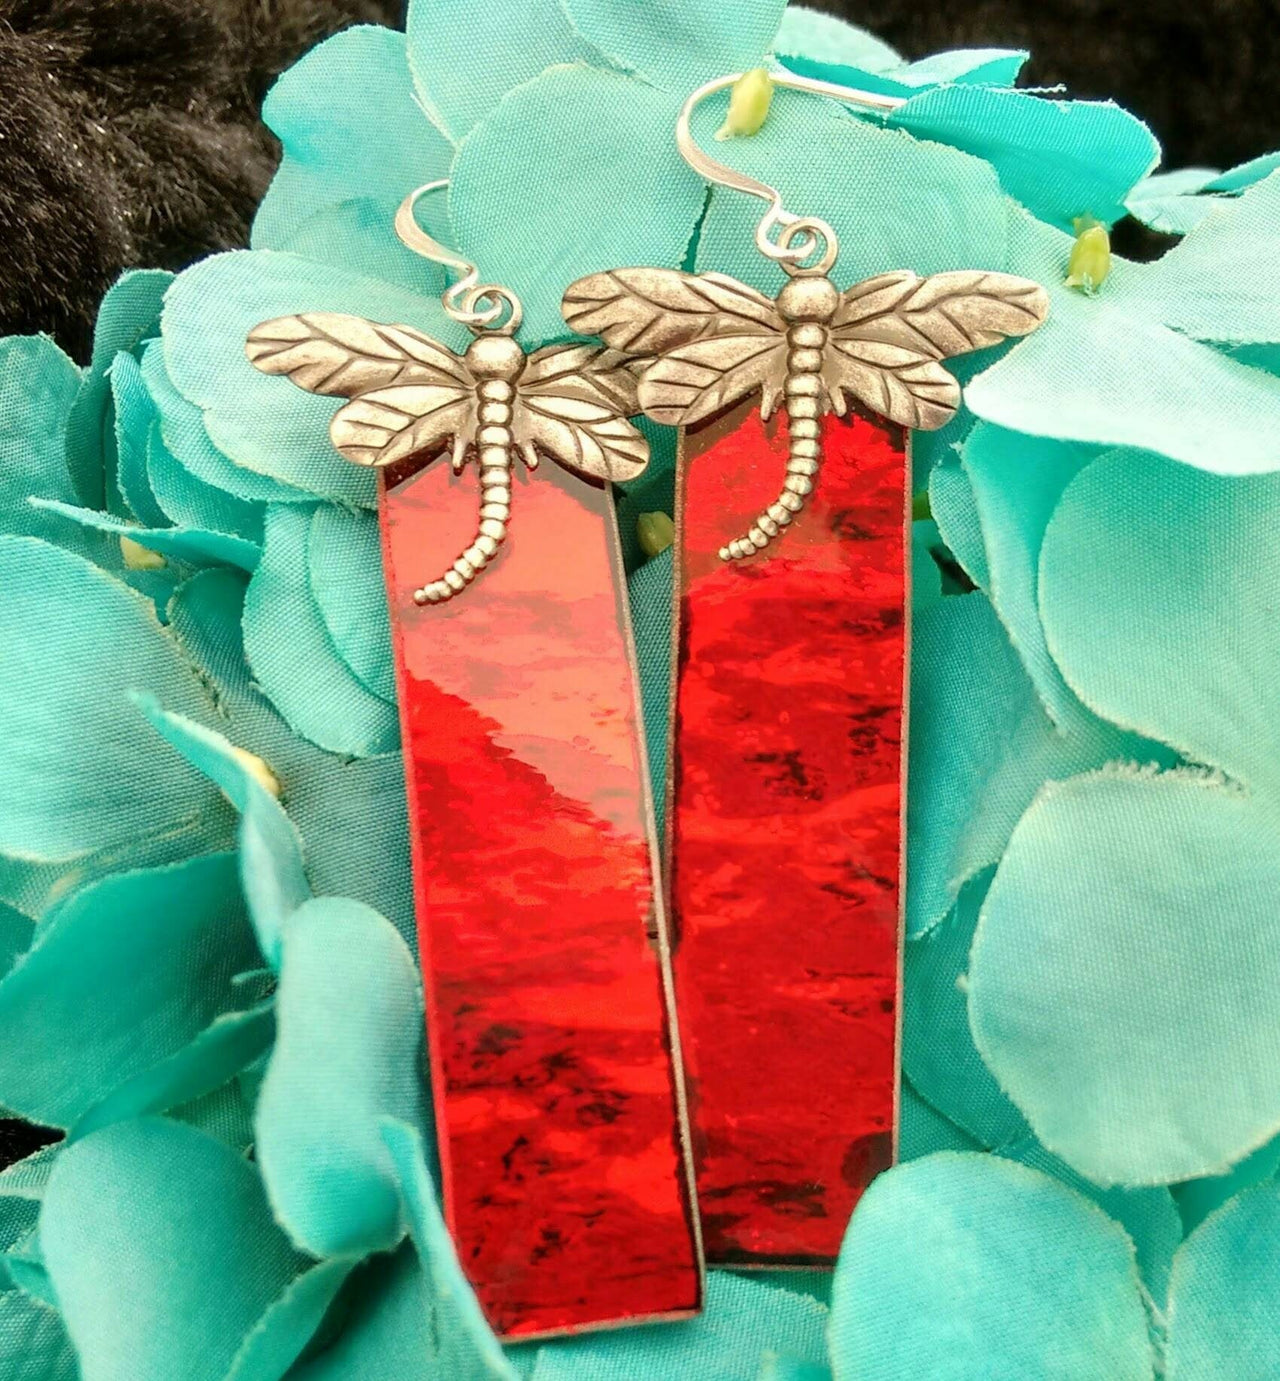 Dragonfly red rippled mirror glass stained glass earrings